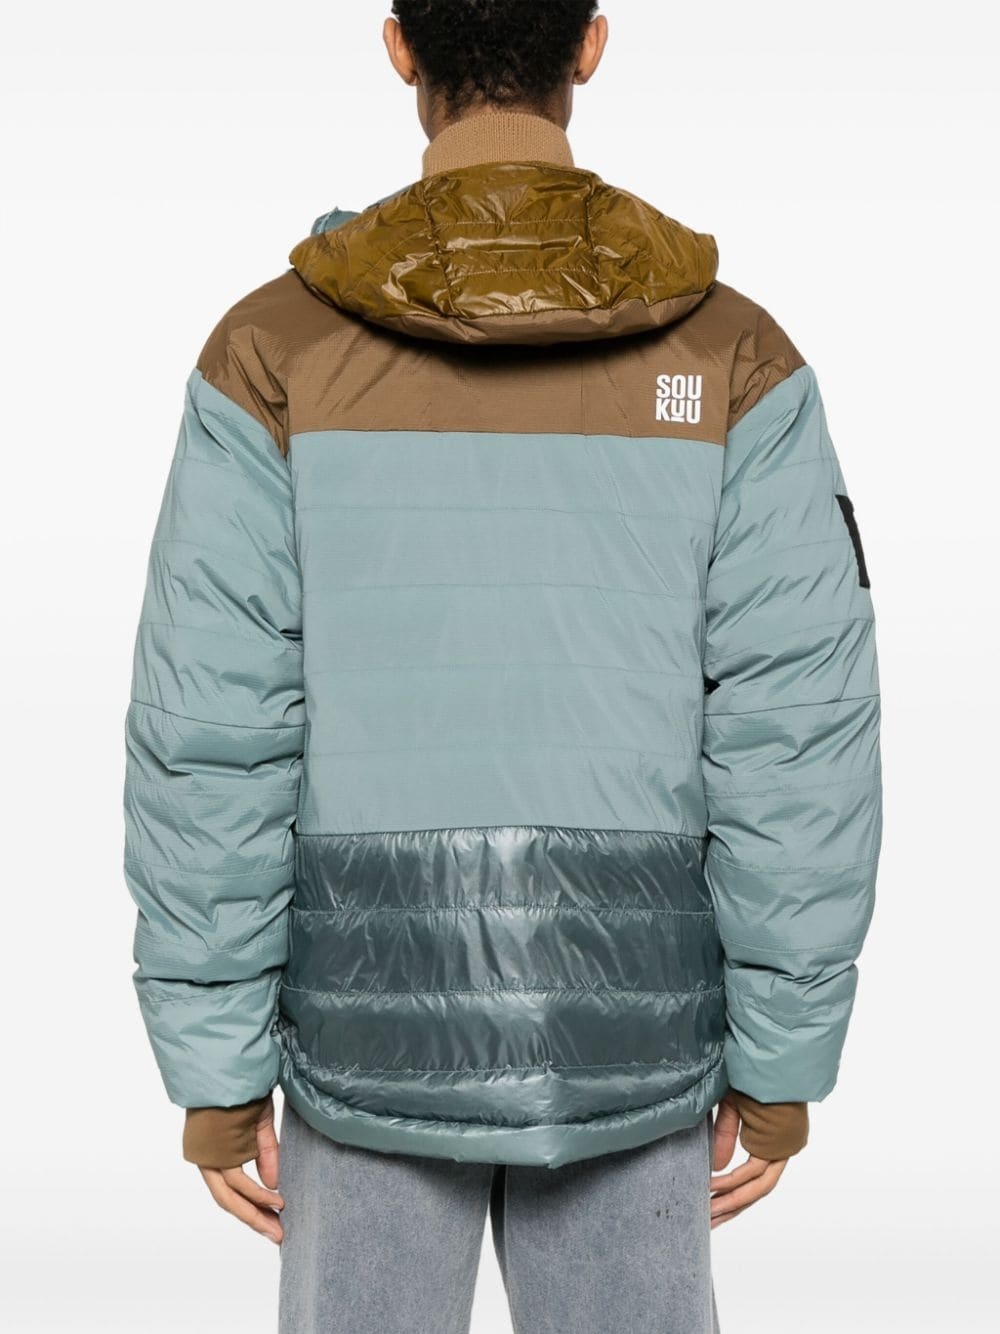 Undercover x The North Face 50/50 Mountain Jacket (NF0A84S3WI7) - 5